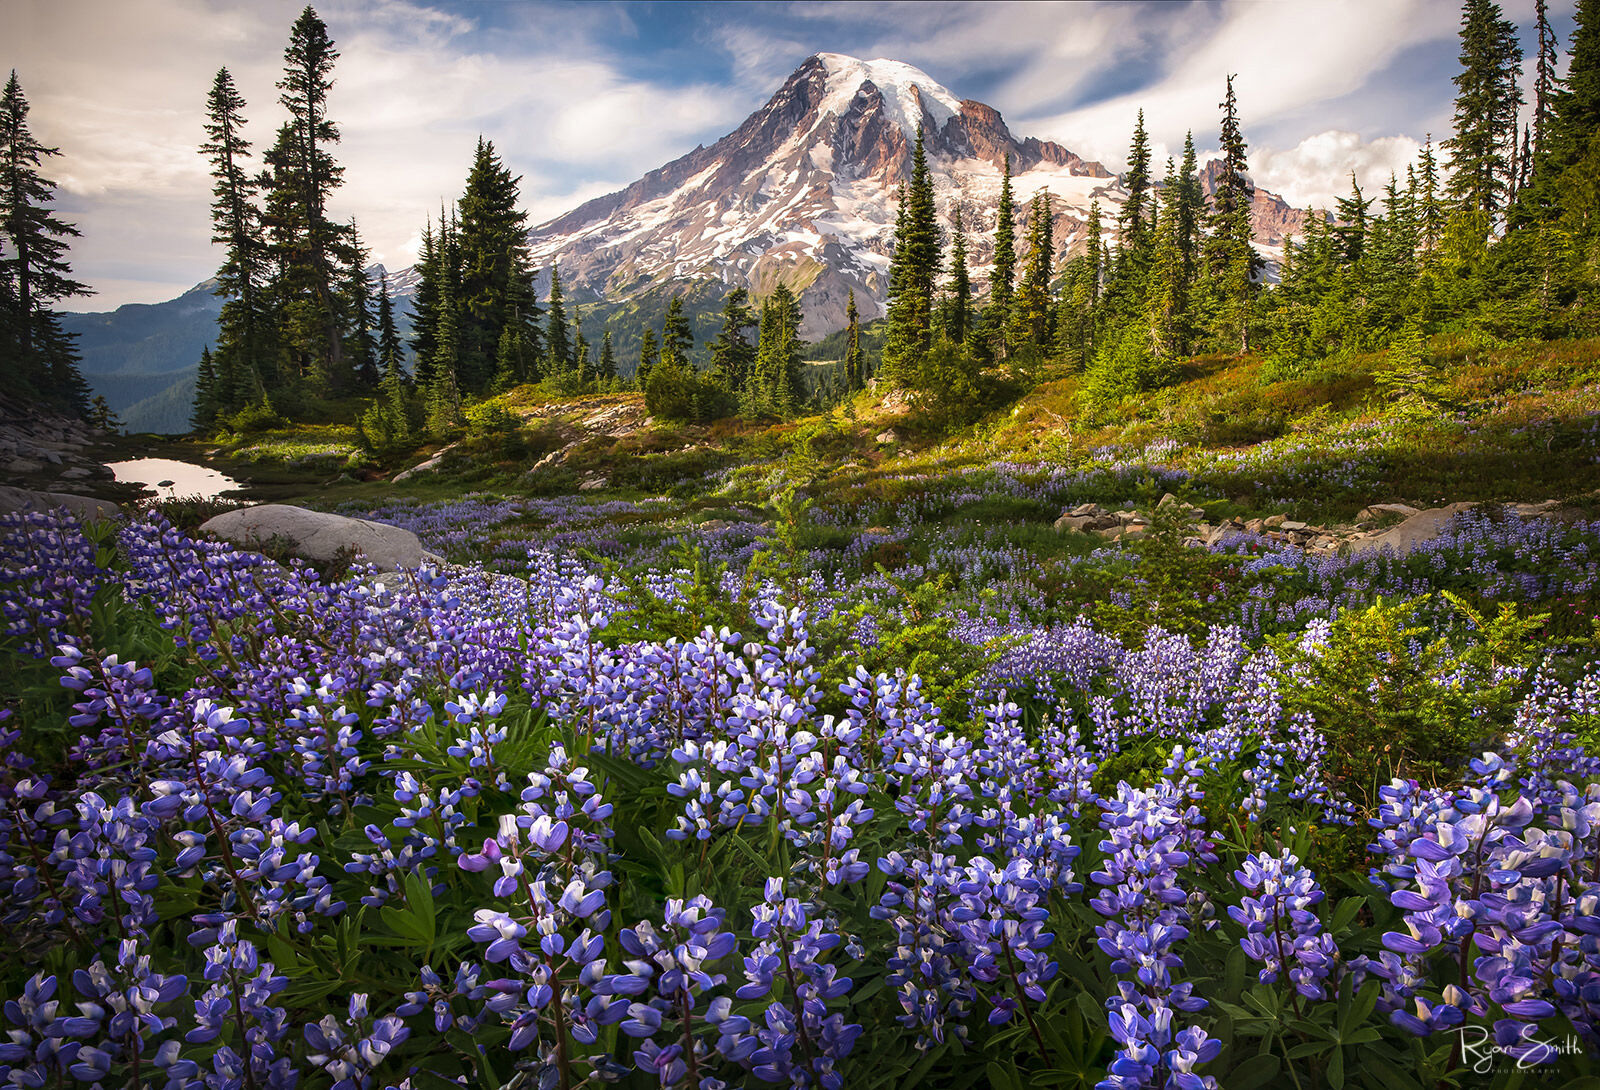 Purple and blue lupine flowers in a meadow set a stage for a Mt. Rainier mountain and peak in the background that is just touched by the sunrise.